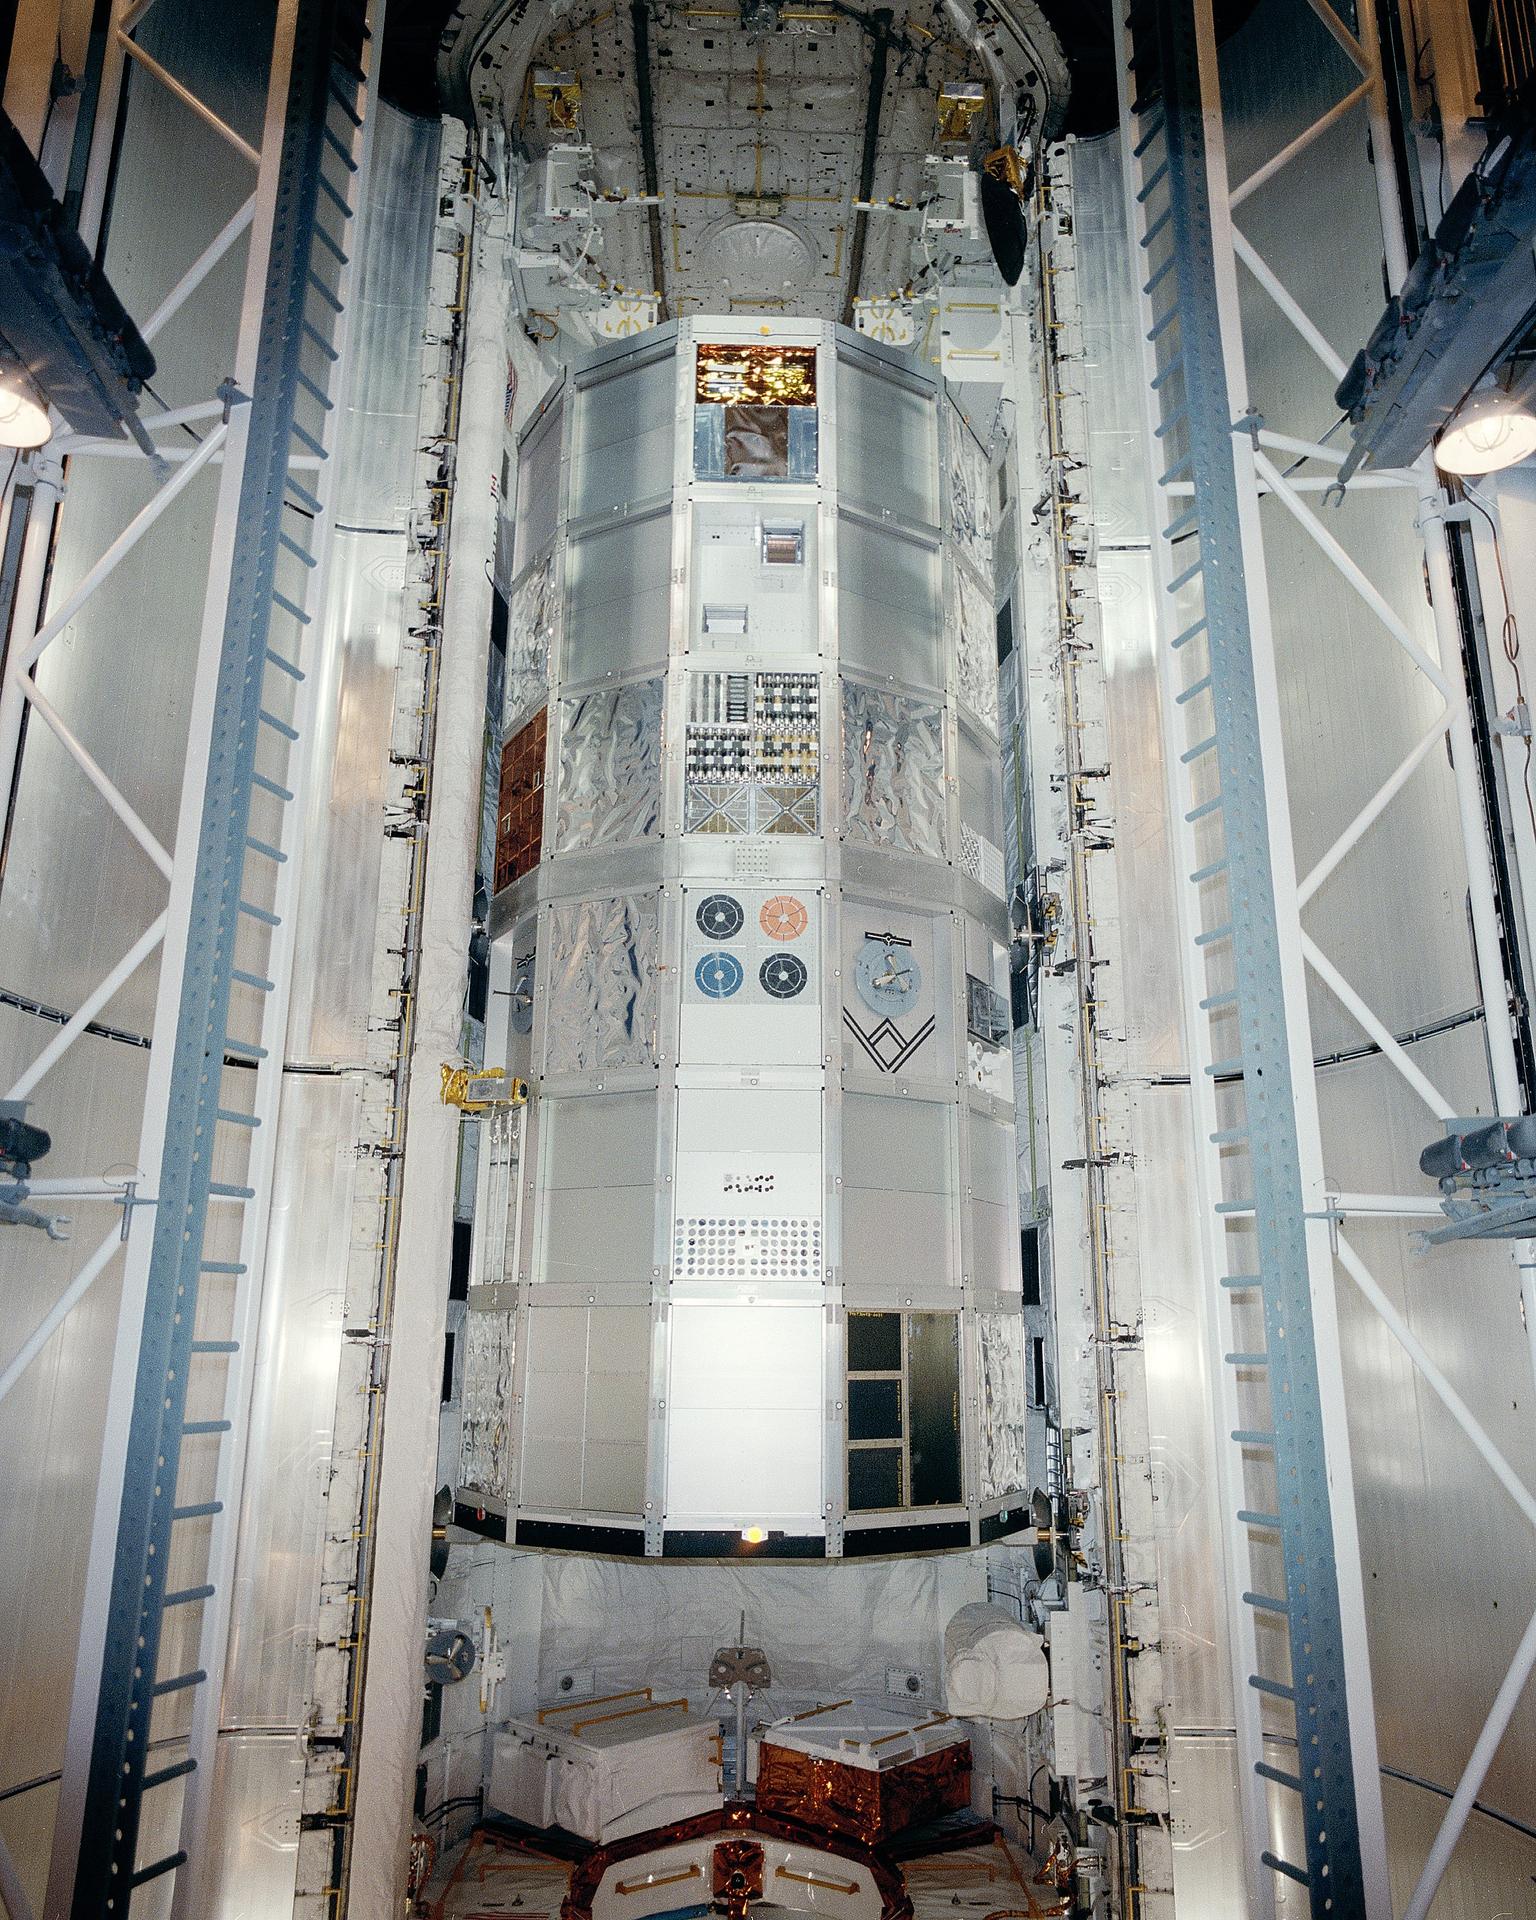 Challenger's payload bay for STS-41C